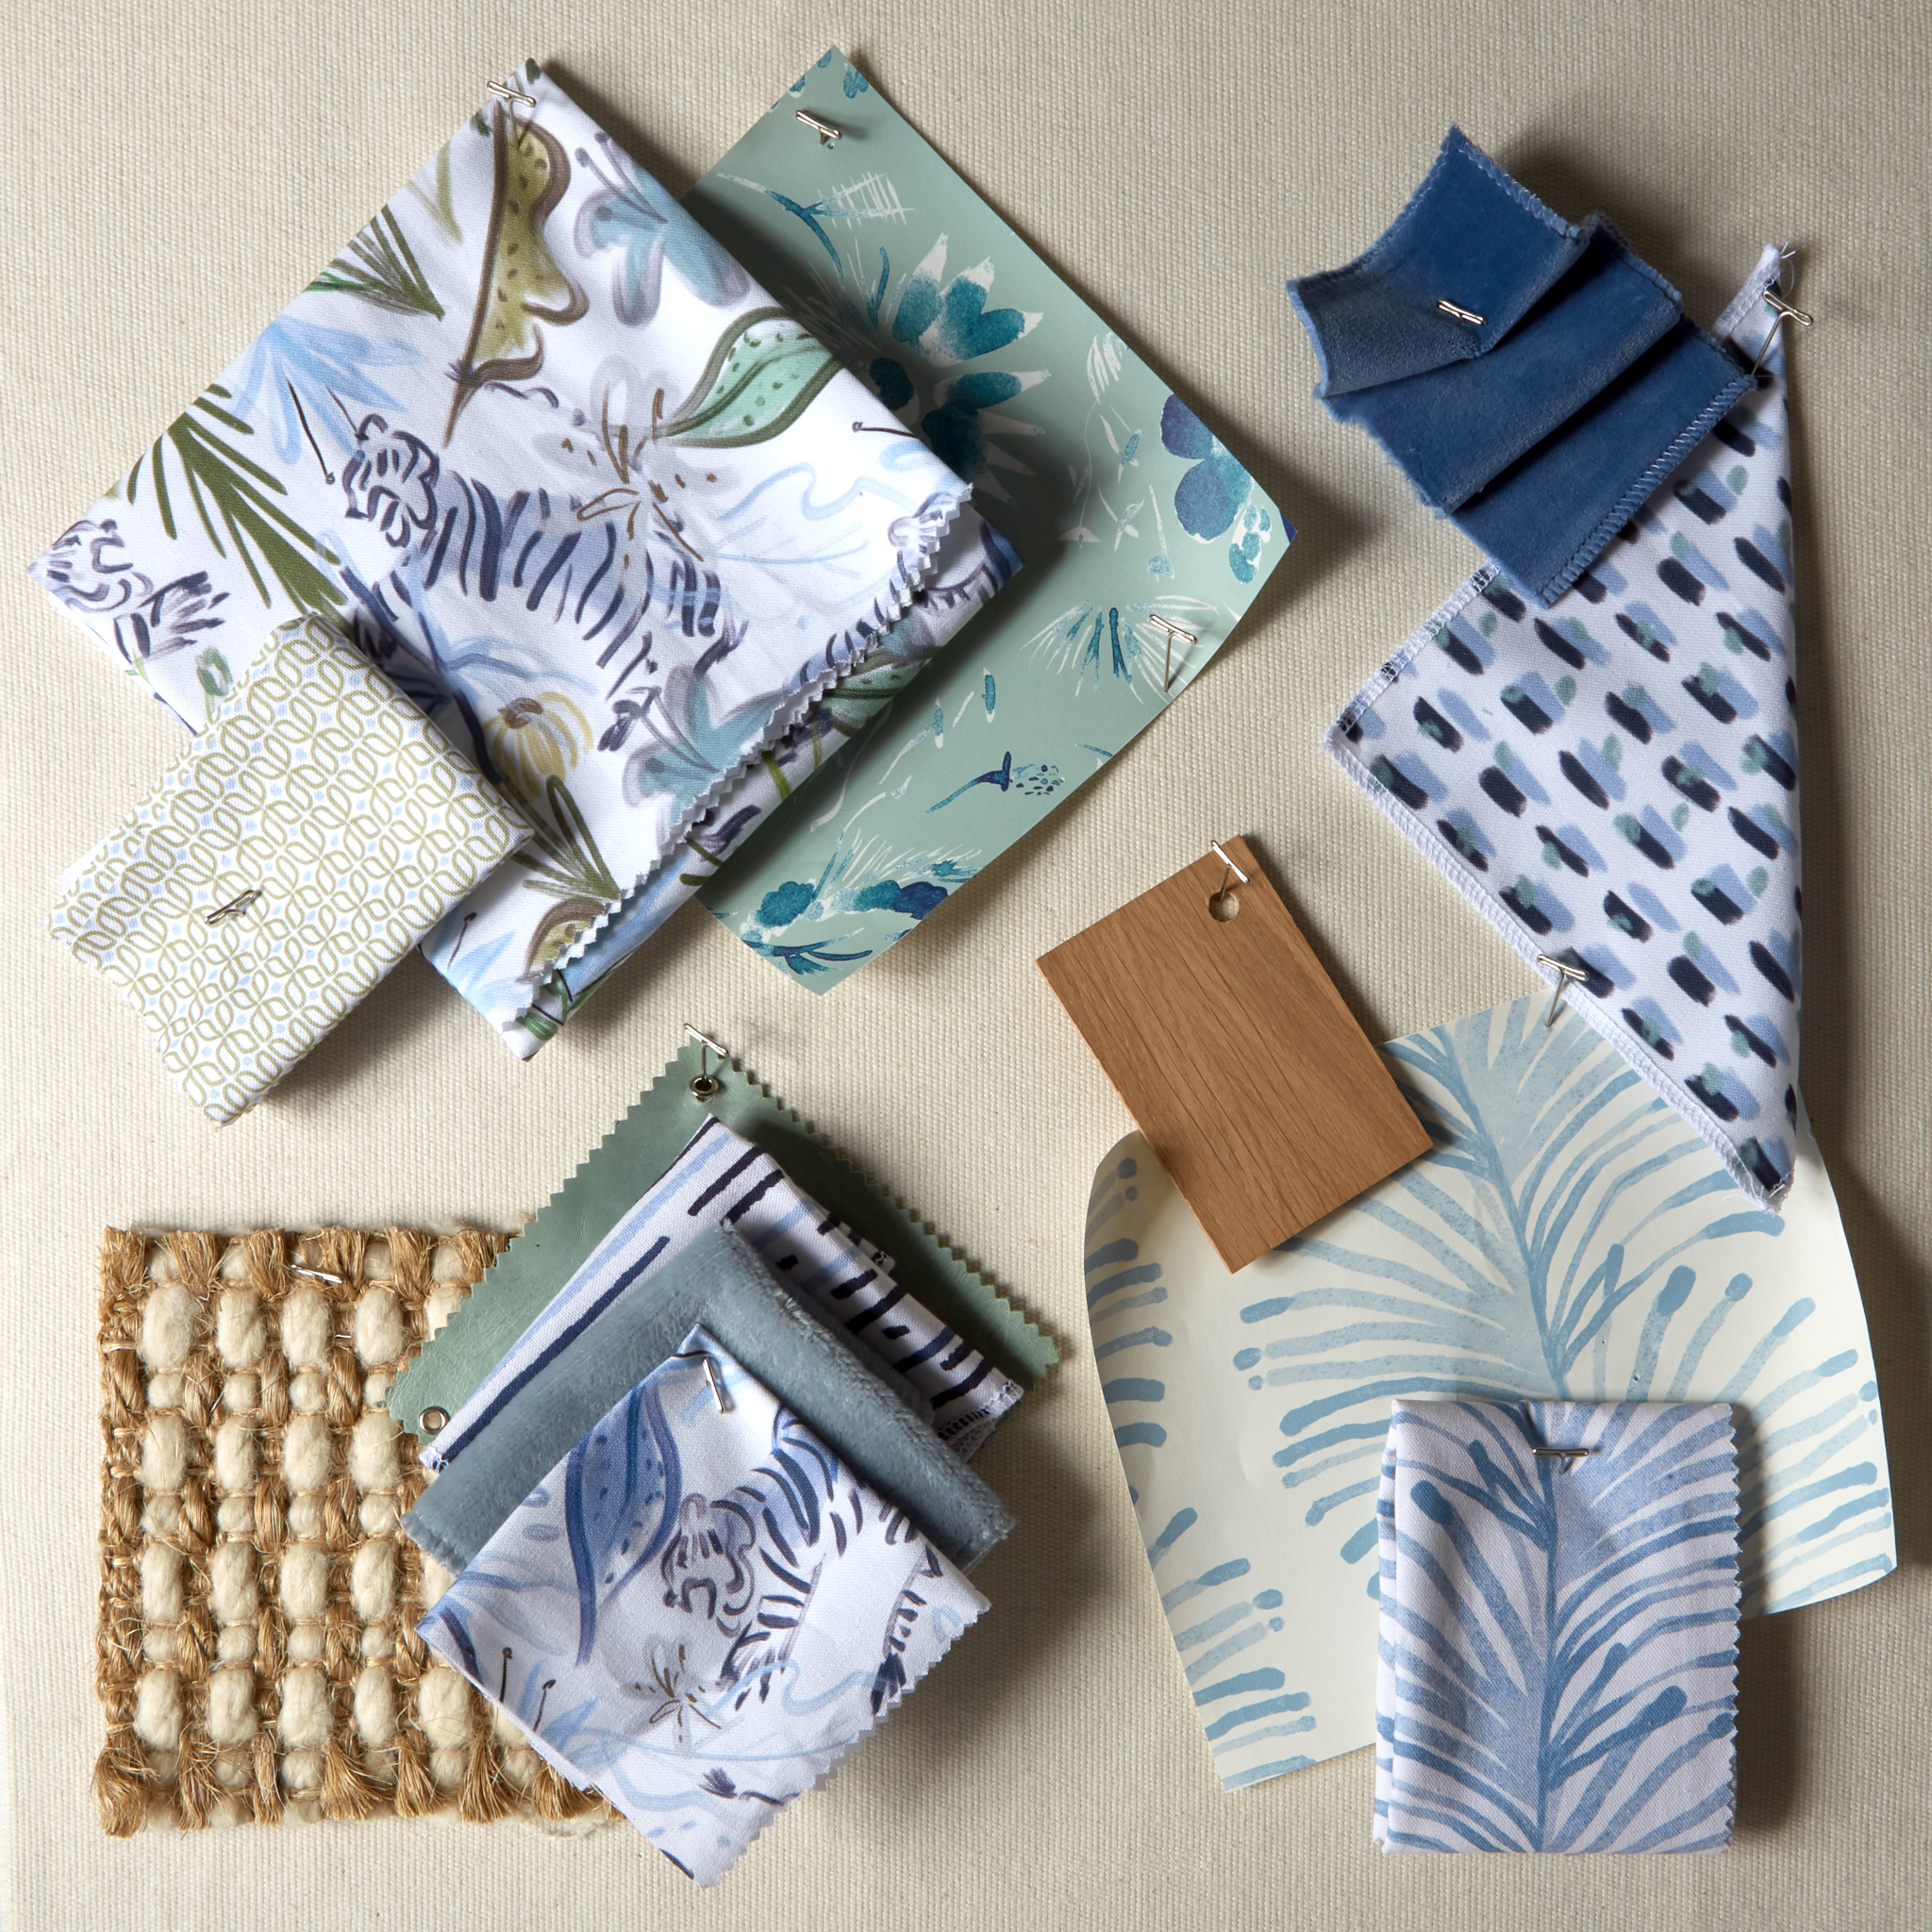 Interior design moodboard and fabric inspirations with Blue Chinoiserie Tiger Printed Swatch, Sky Blue Printed Swatch, Moss Green Geometric Printed Swatch, Sky Blue Botanical Stripe Printed Swatch, and navy velvet swatch